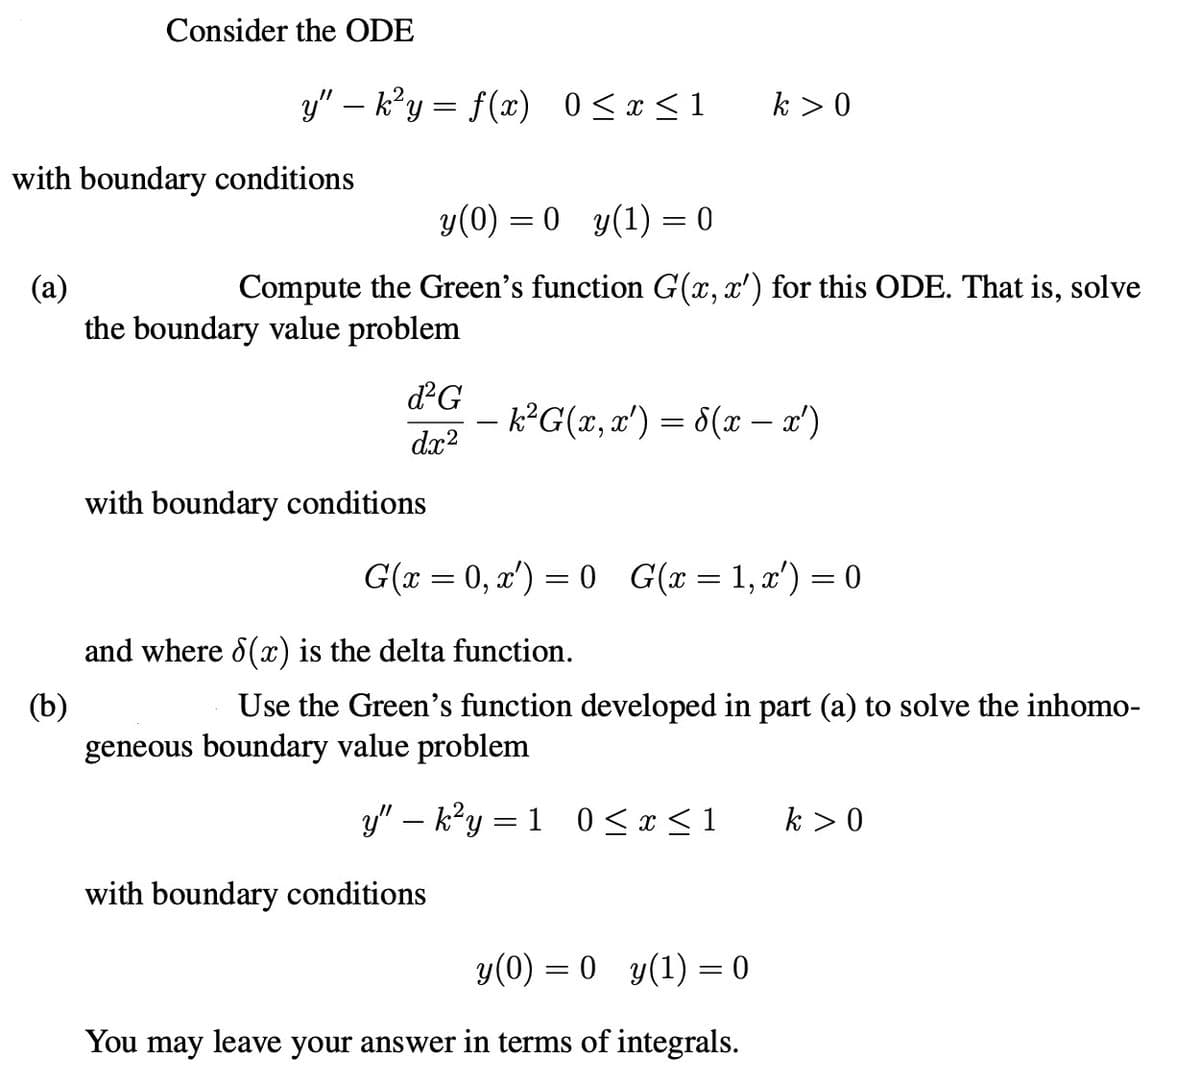 Consider the ODE
y"-k²y = f(x) 0≤x≤1
k > 0
with boundary conditions
(a)
(b)
y(0) = 0 y(1) = 0
Compute the Green's function G(x, x') for this ODE. That is, solve
the boundary value problem
d²G
- k²G(x, x') = d(x − x')
dx2
with boundary conditions
G(x = 0, x) = 0 G(x = 1, x') = 0
and where 8(x) is the delta function.
Use the Green's function developed in part (a) to solve the inhomo-
geneous boundary value problem
=
y"-k²y 10≤ x ≤1
k > 0
with boundary conditions
y(0) = 0 y(1) = 0
You may leave your answer in terms of integrals.